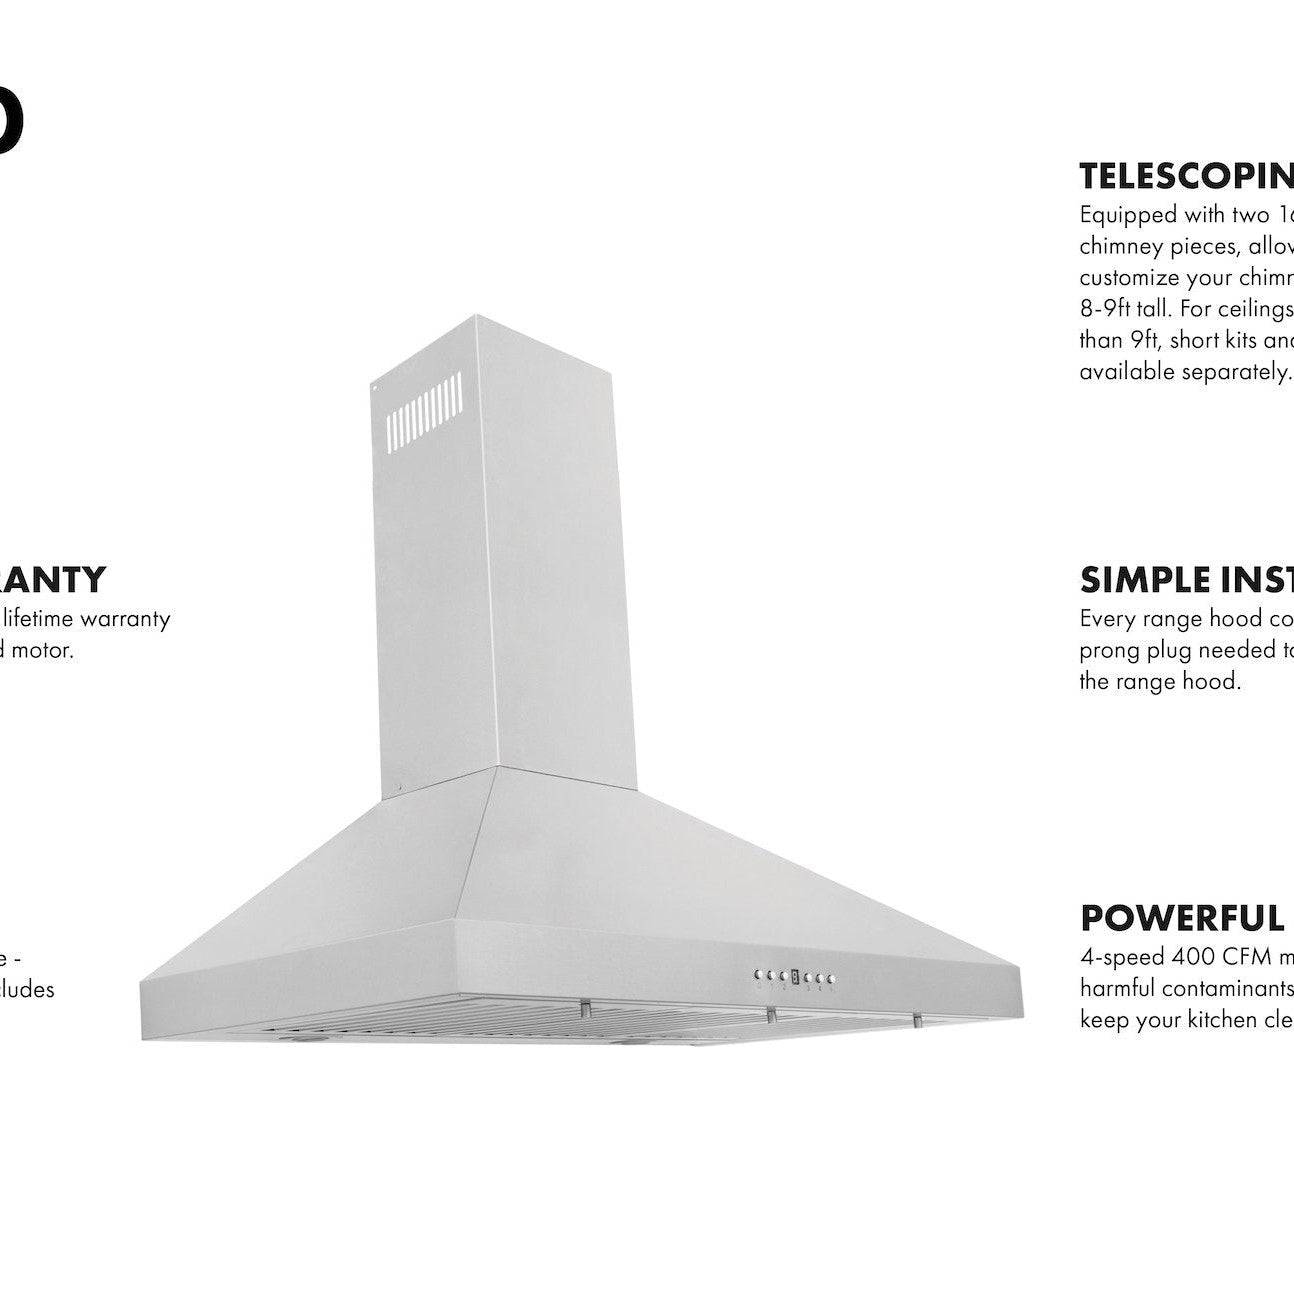 KL3-30 features lifetime warranty, LED lights, telescoping chimney, simple installation, and powerful motor.